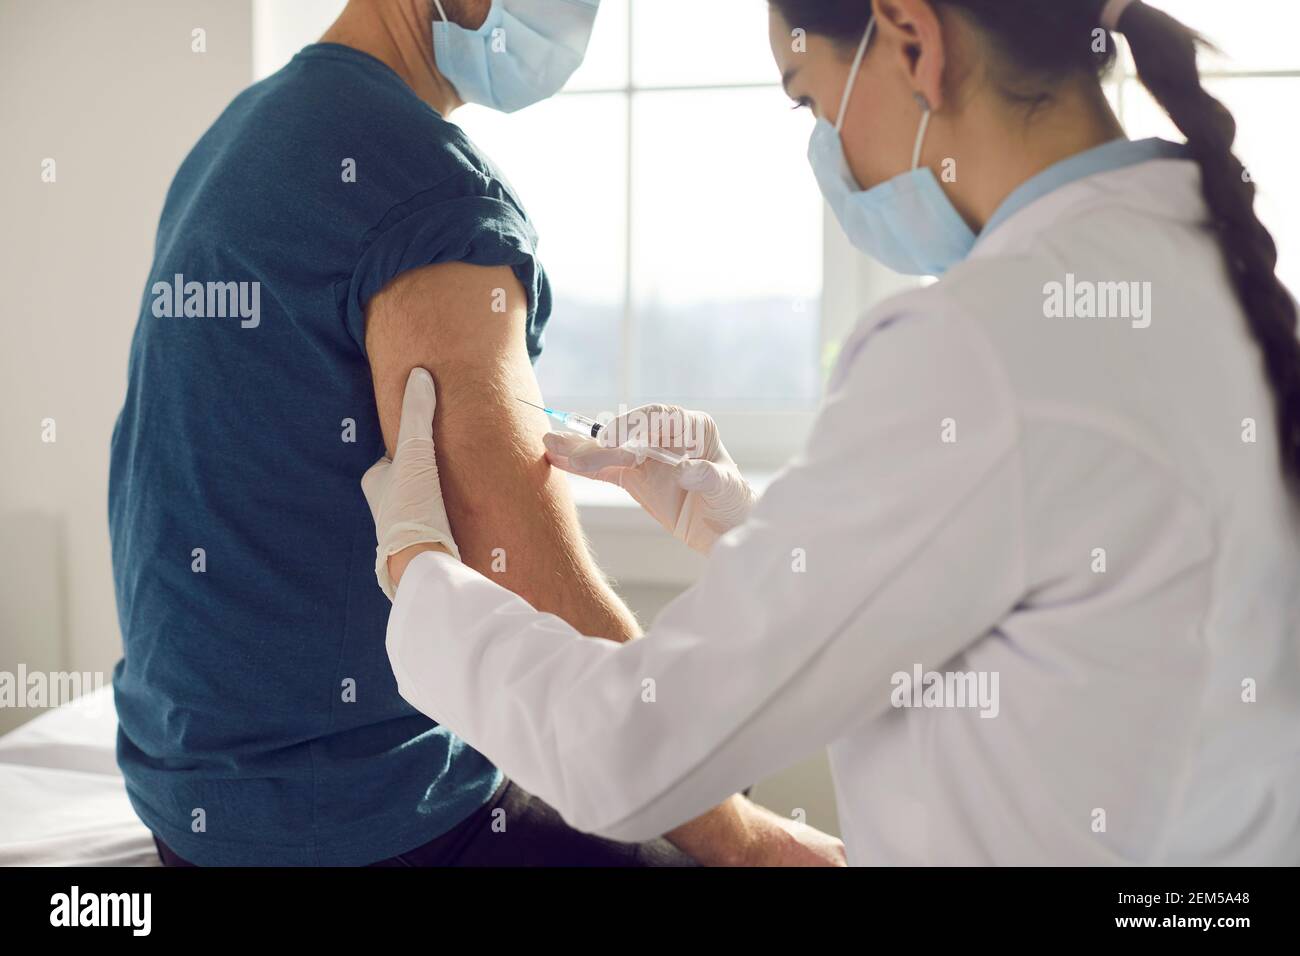 Female medical worker injecting vaccine and making vaccination for man Stock Photo